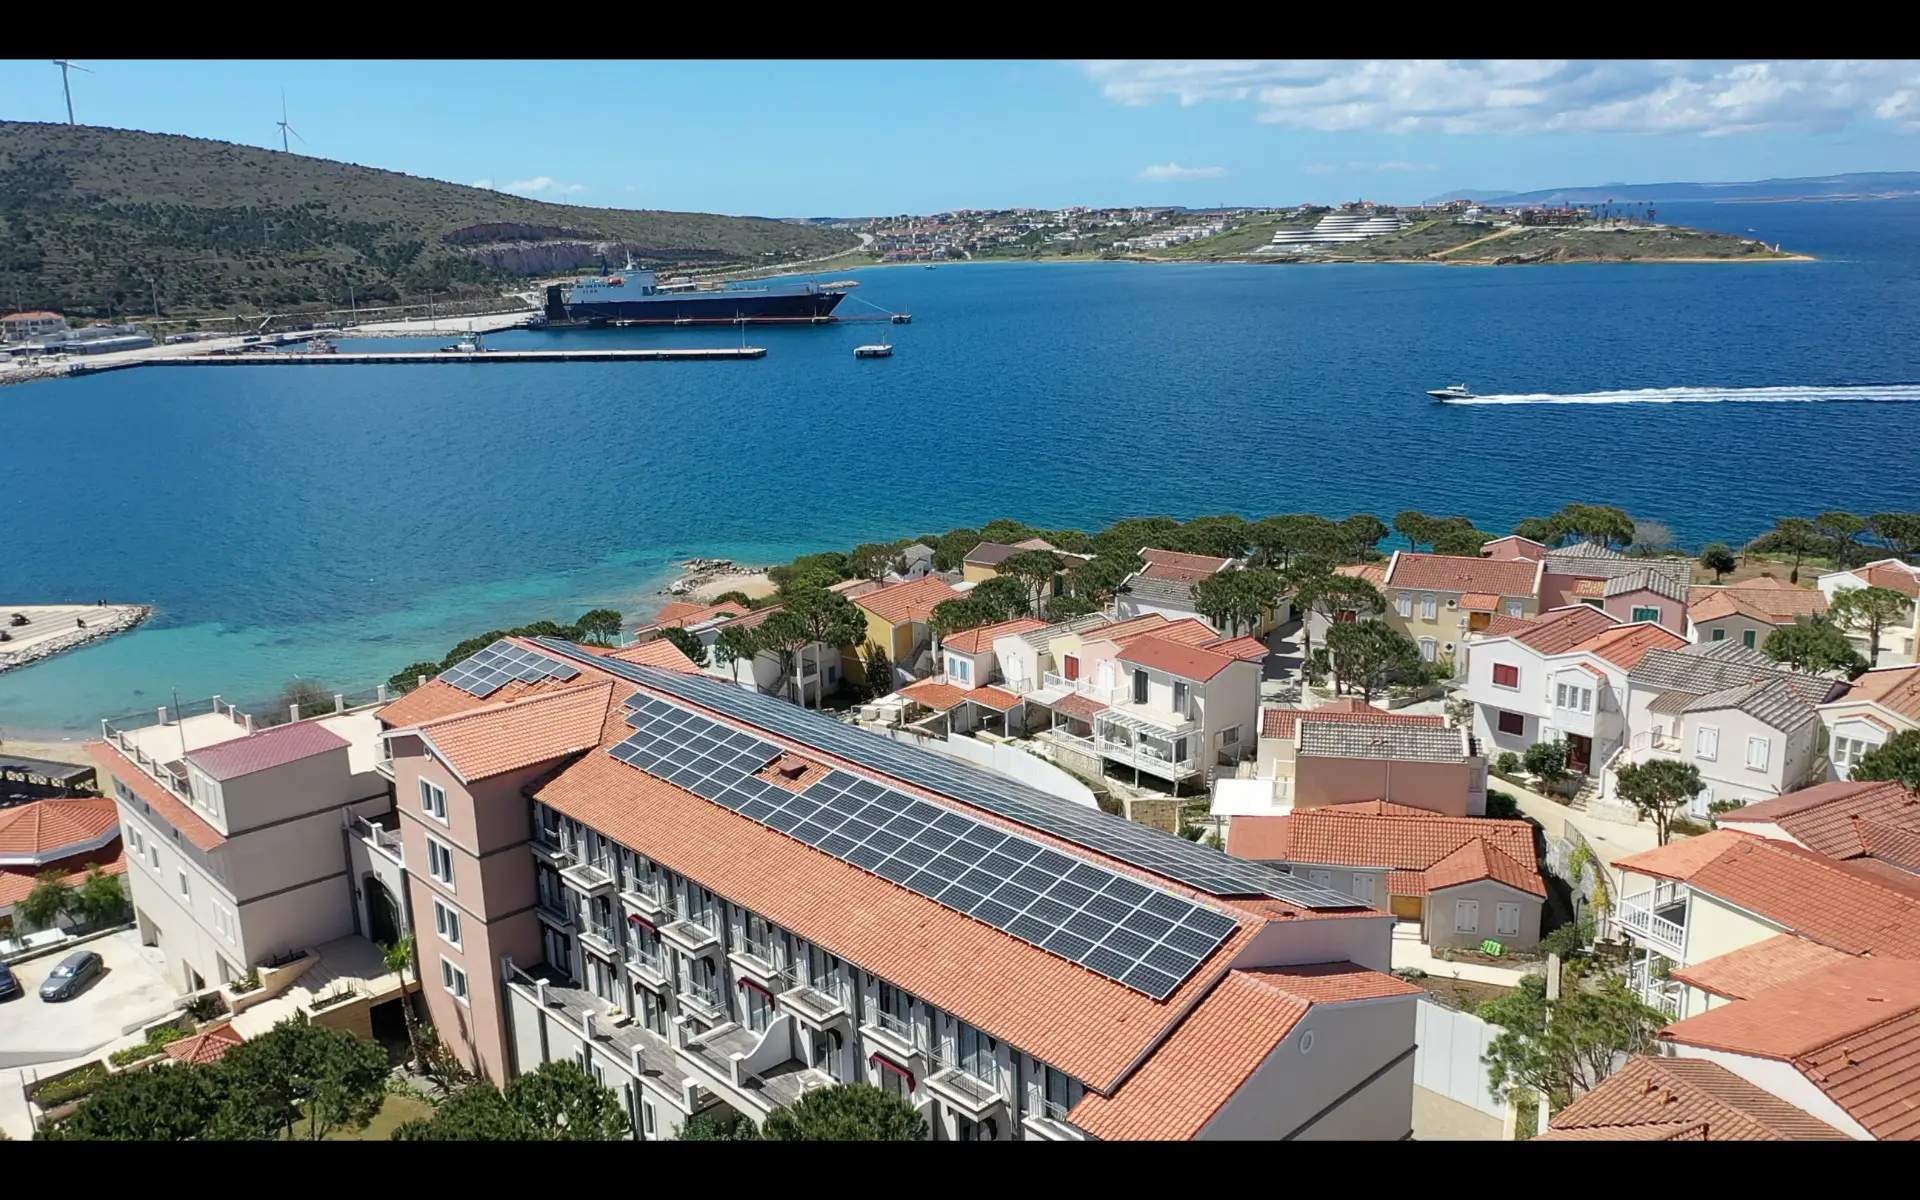 Why Use a Solar Energy System in Your Hotel?